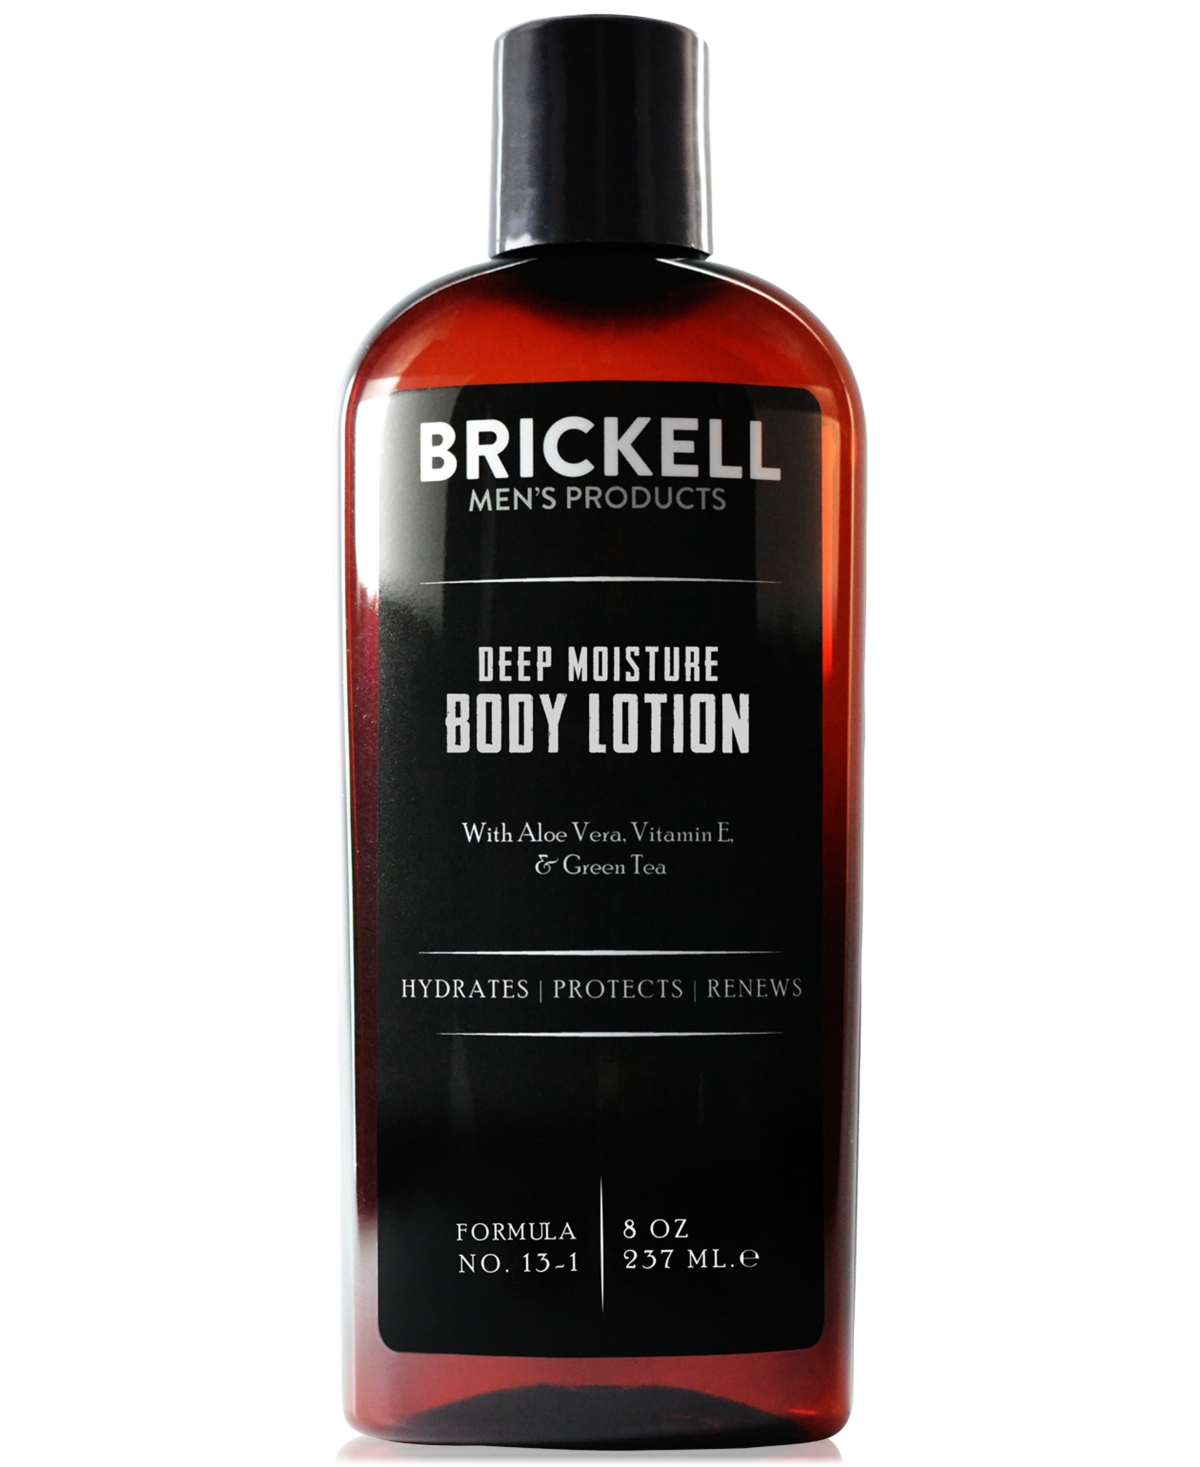 Brickell Mens Products Brickell Men's Products Deep Moisture Body Lotion, 8 Oz.